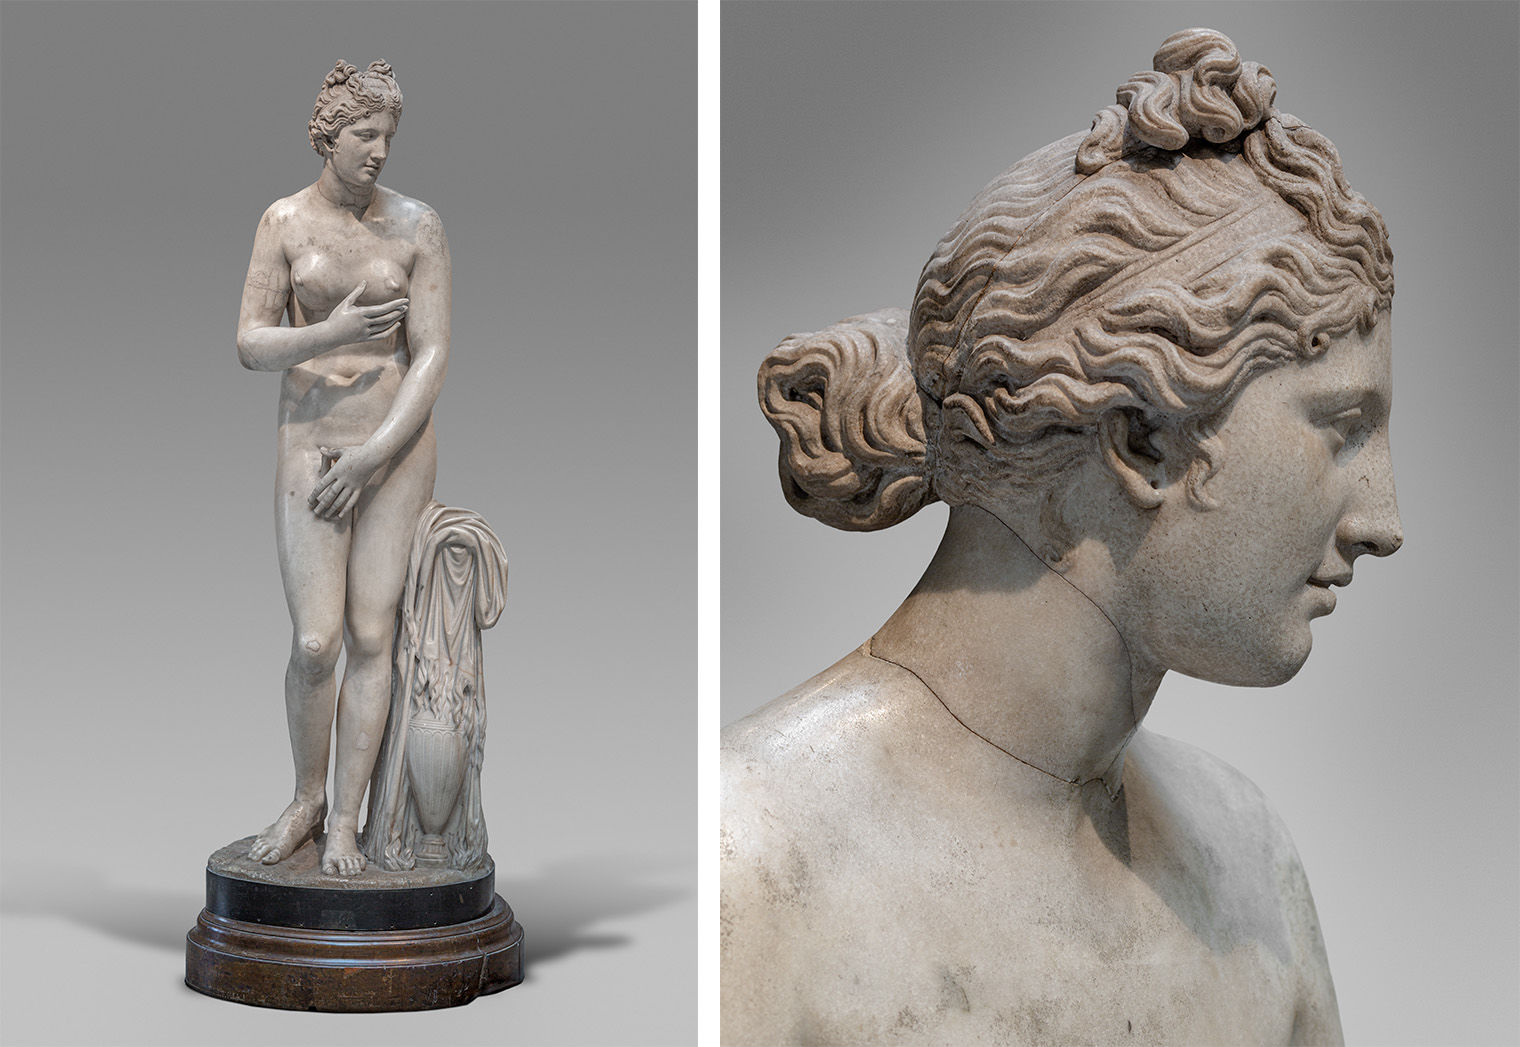 On left: Marble statue of Aphrodite. Her right hand moves to hide her breasts while her left hand covers her pubic area. On right: Close up on side profile of marble statue of Aphrodite. 